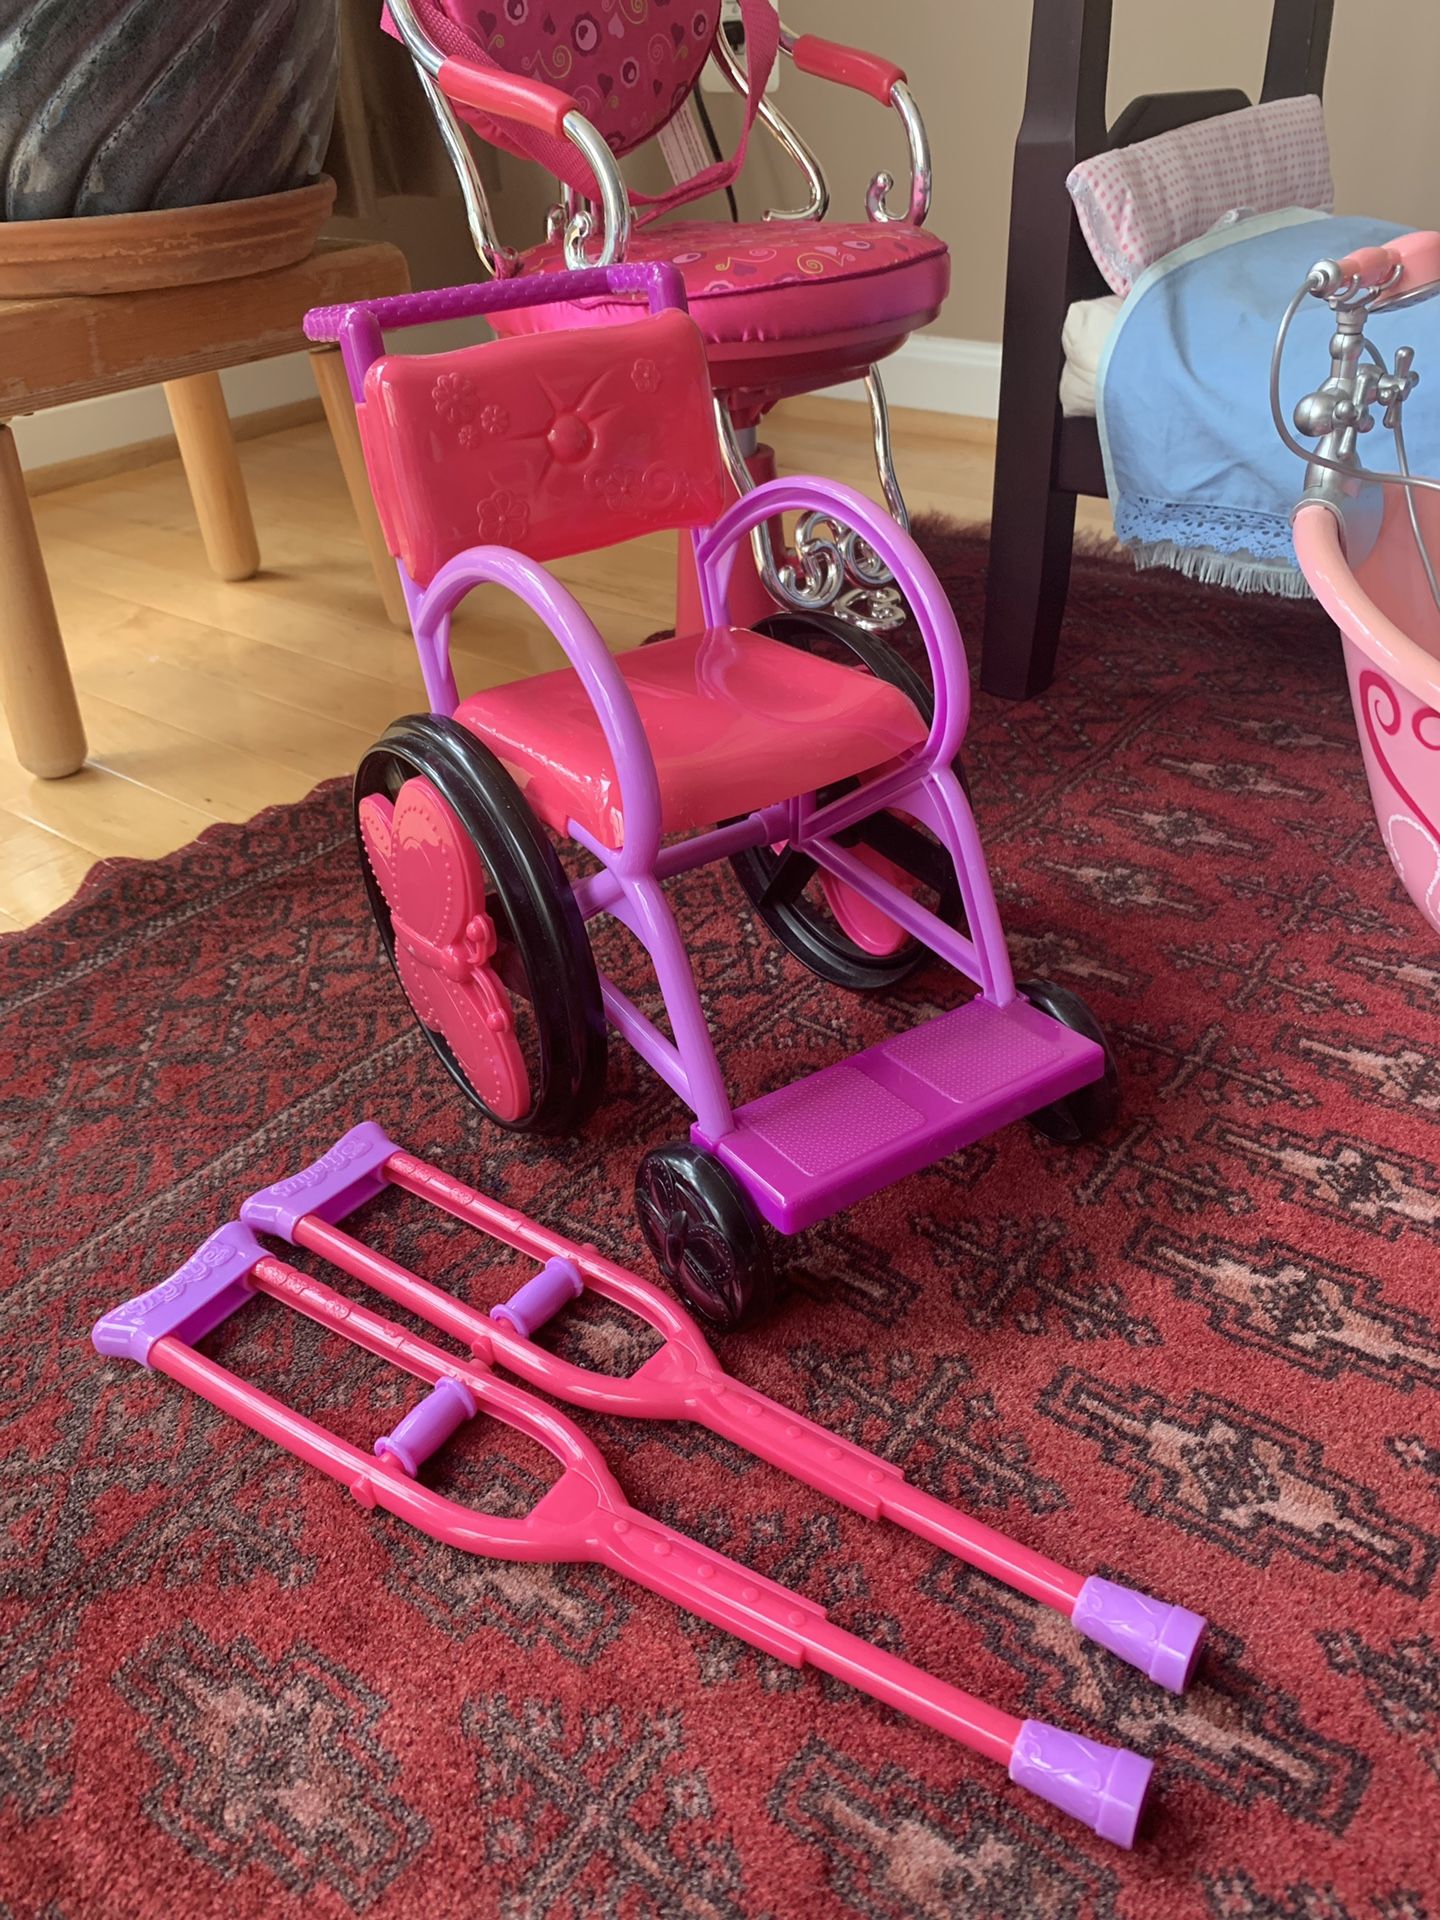 Wheelchair & crutches for American Girl sized dolls